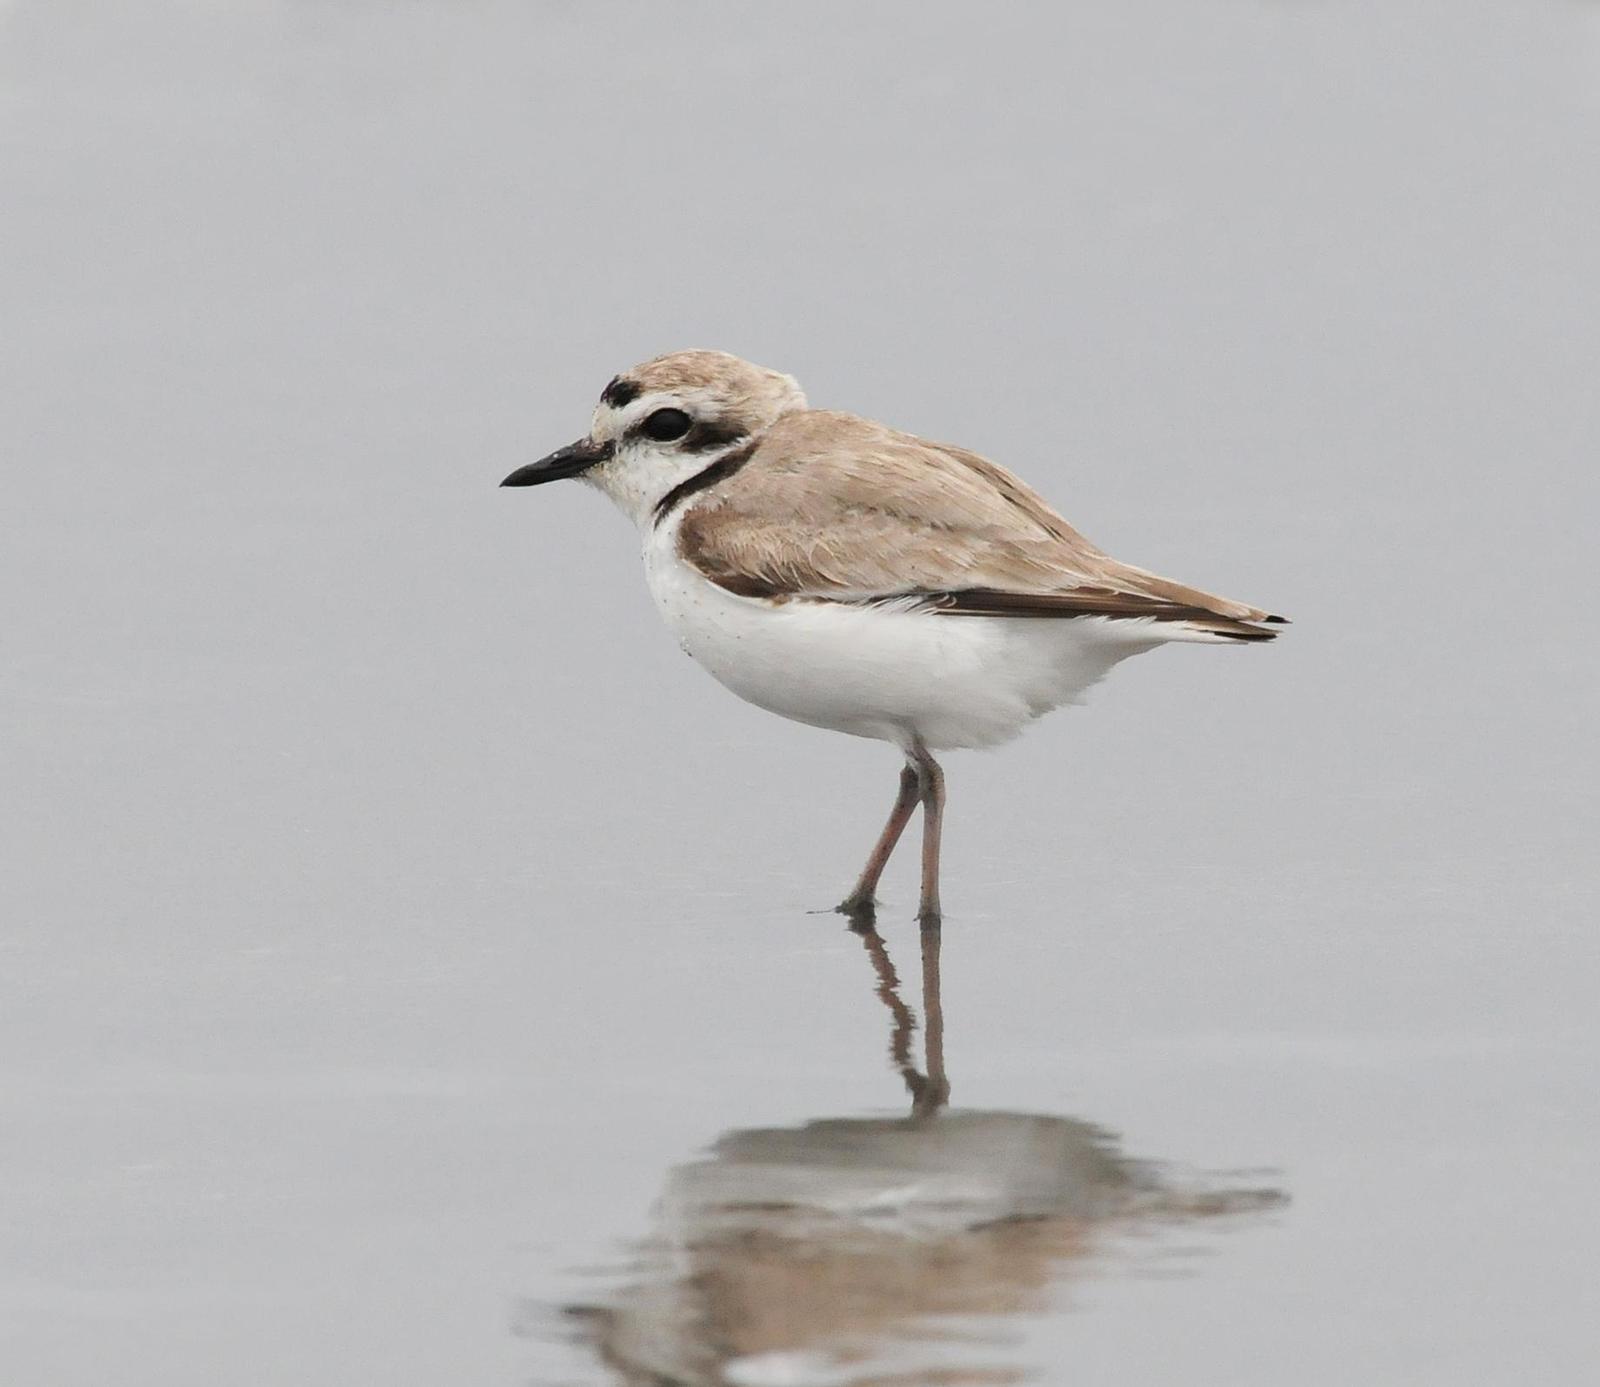 Snowy Plover Photo by Steven Mlodinow